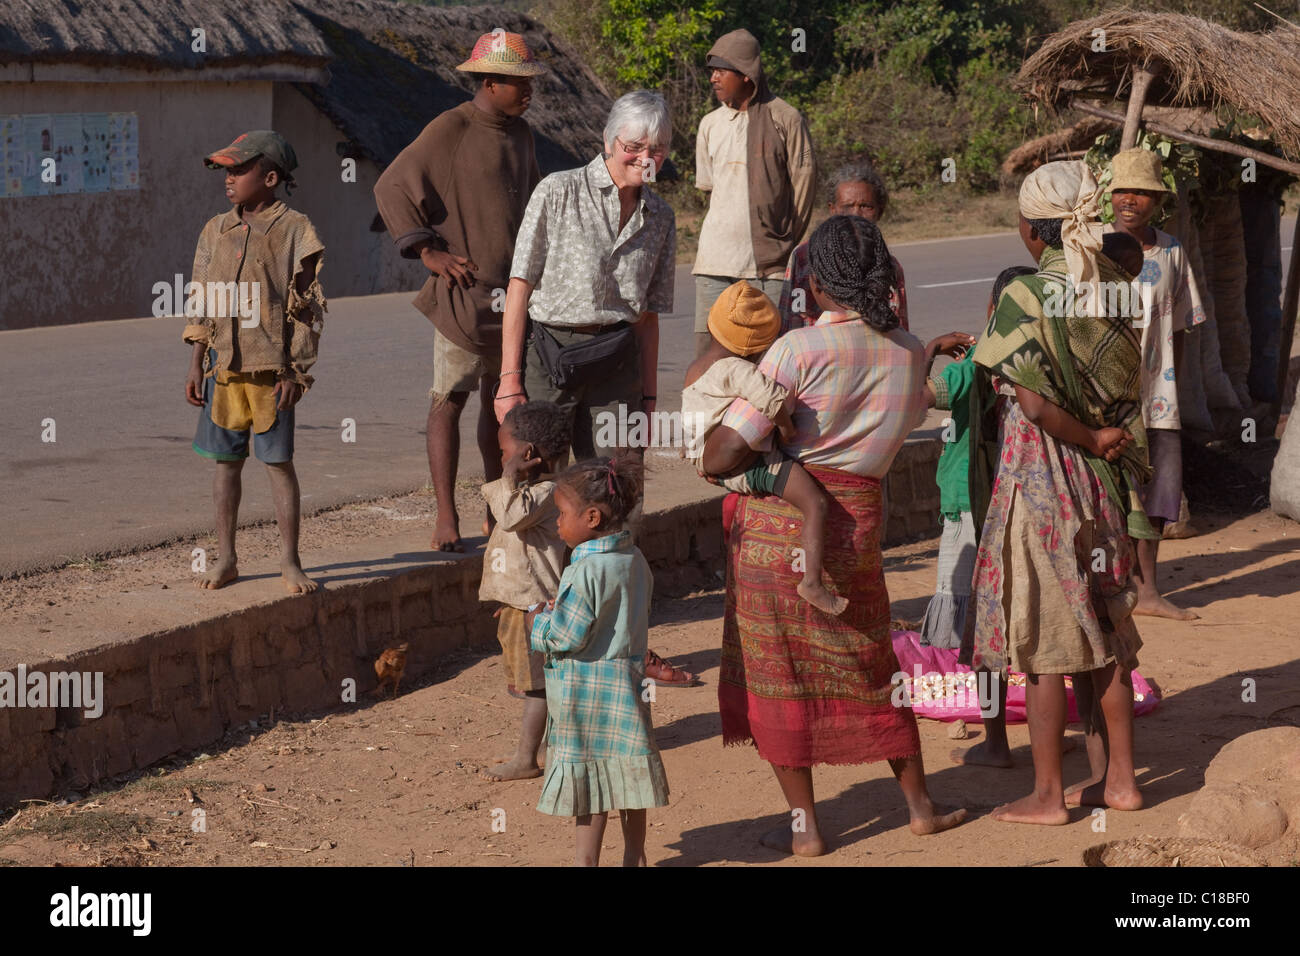 Roadside stopover near Fianarantoa.Tourist meeting with local villagers. Southern central Madagascar. Stock Photo